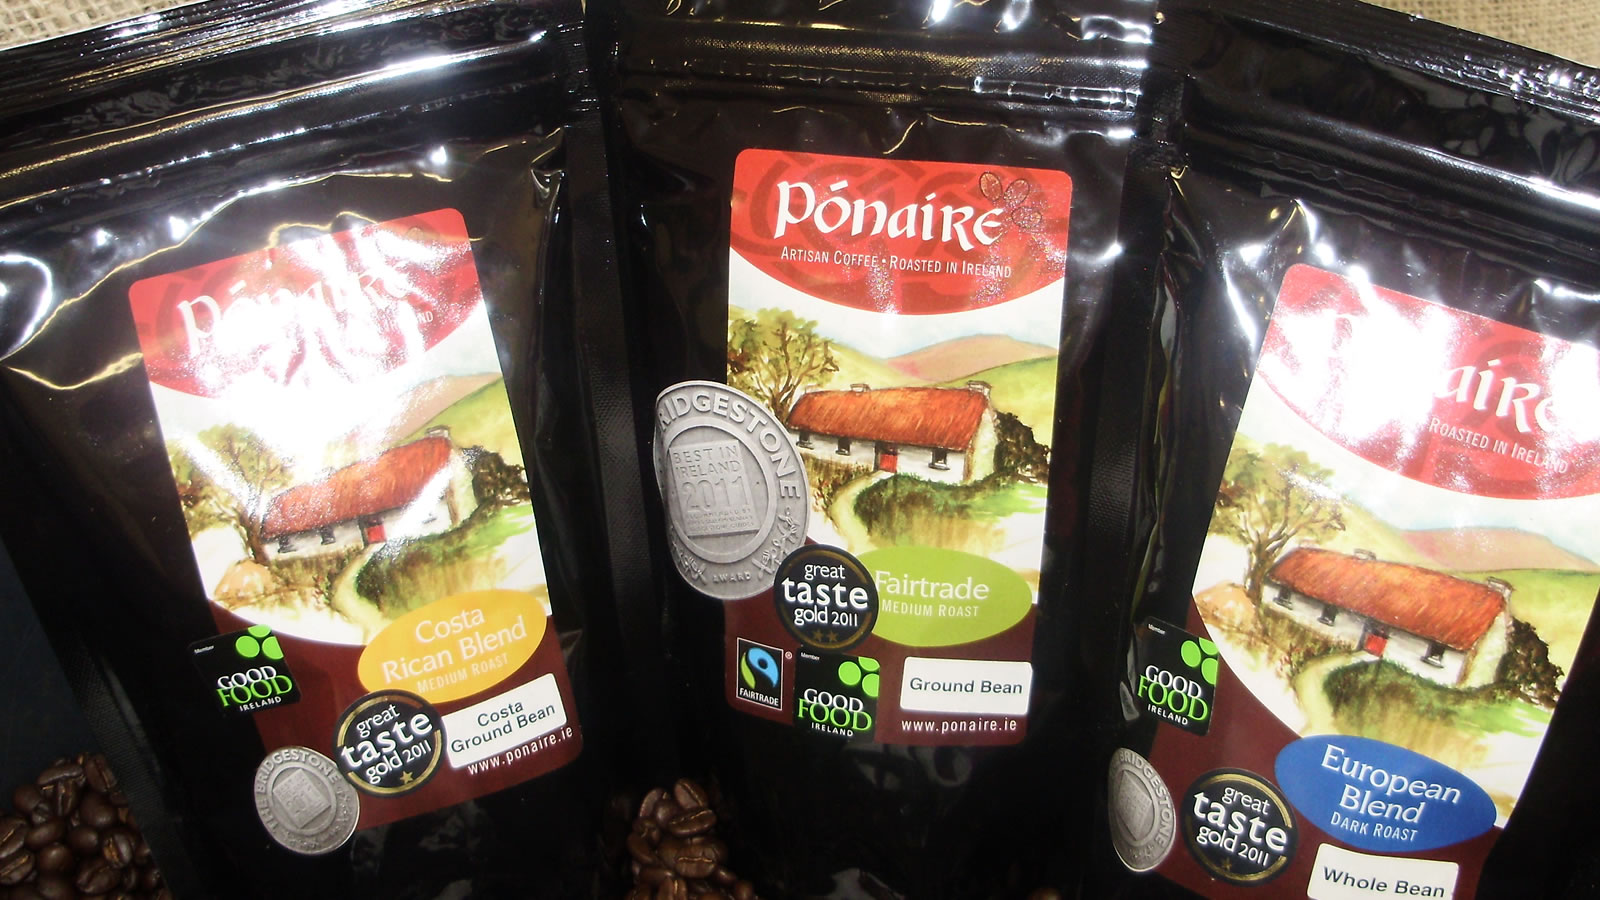 Ponaire.ie Limerick coffee company announce details of exciting Summer coffee